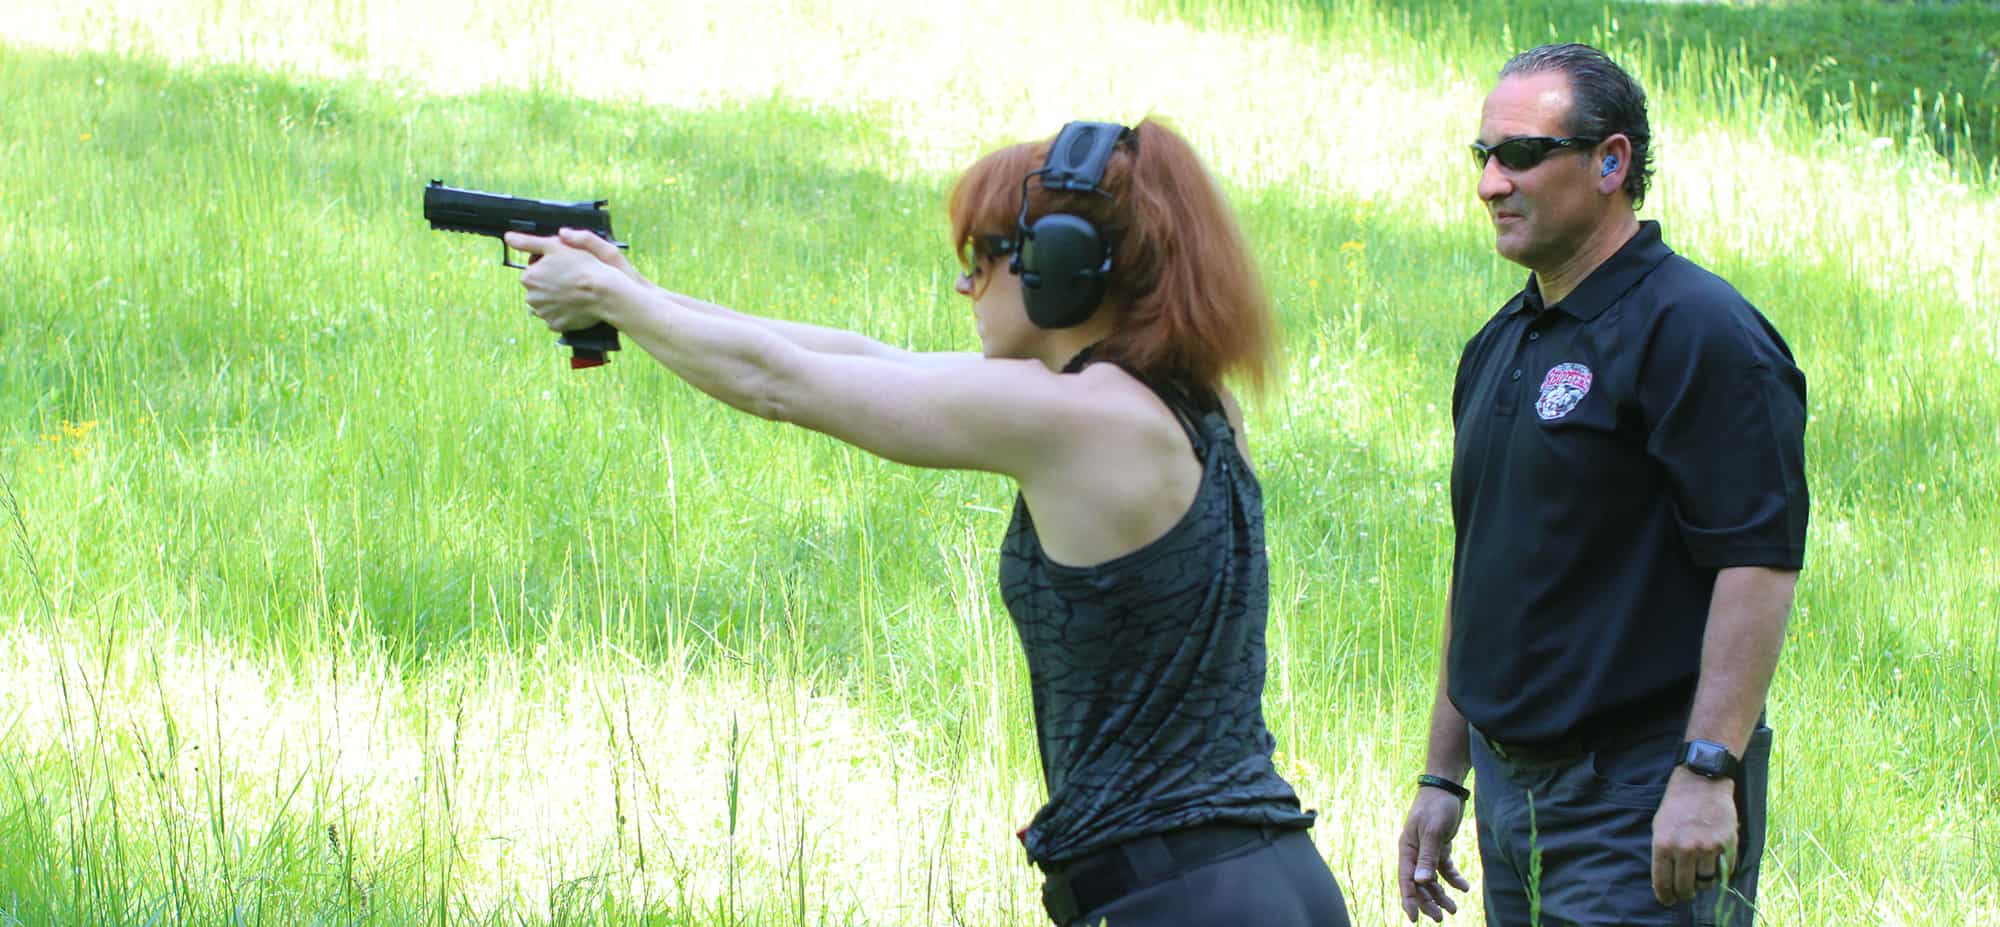 Intuitive Defensive Shooting Courses